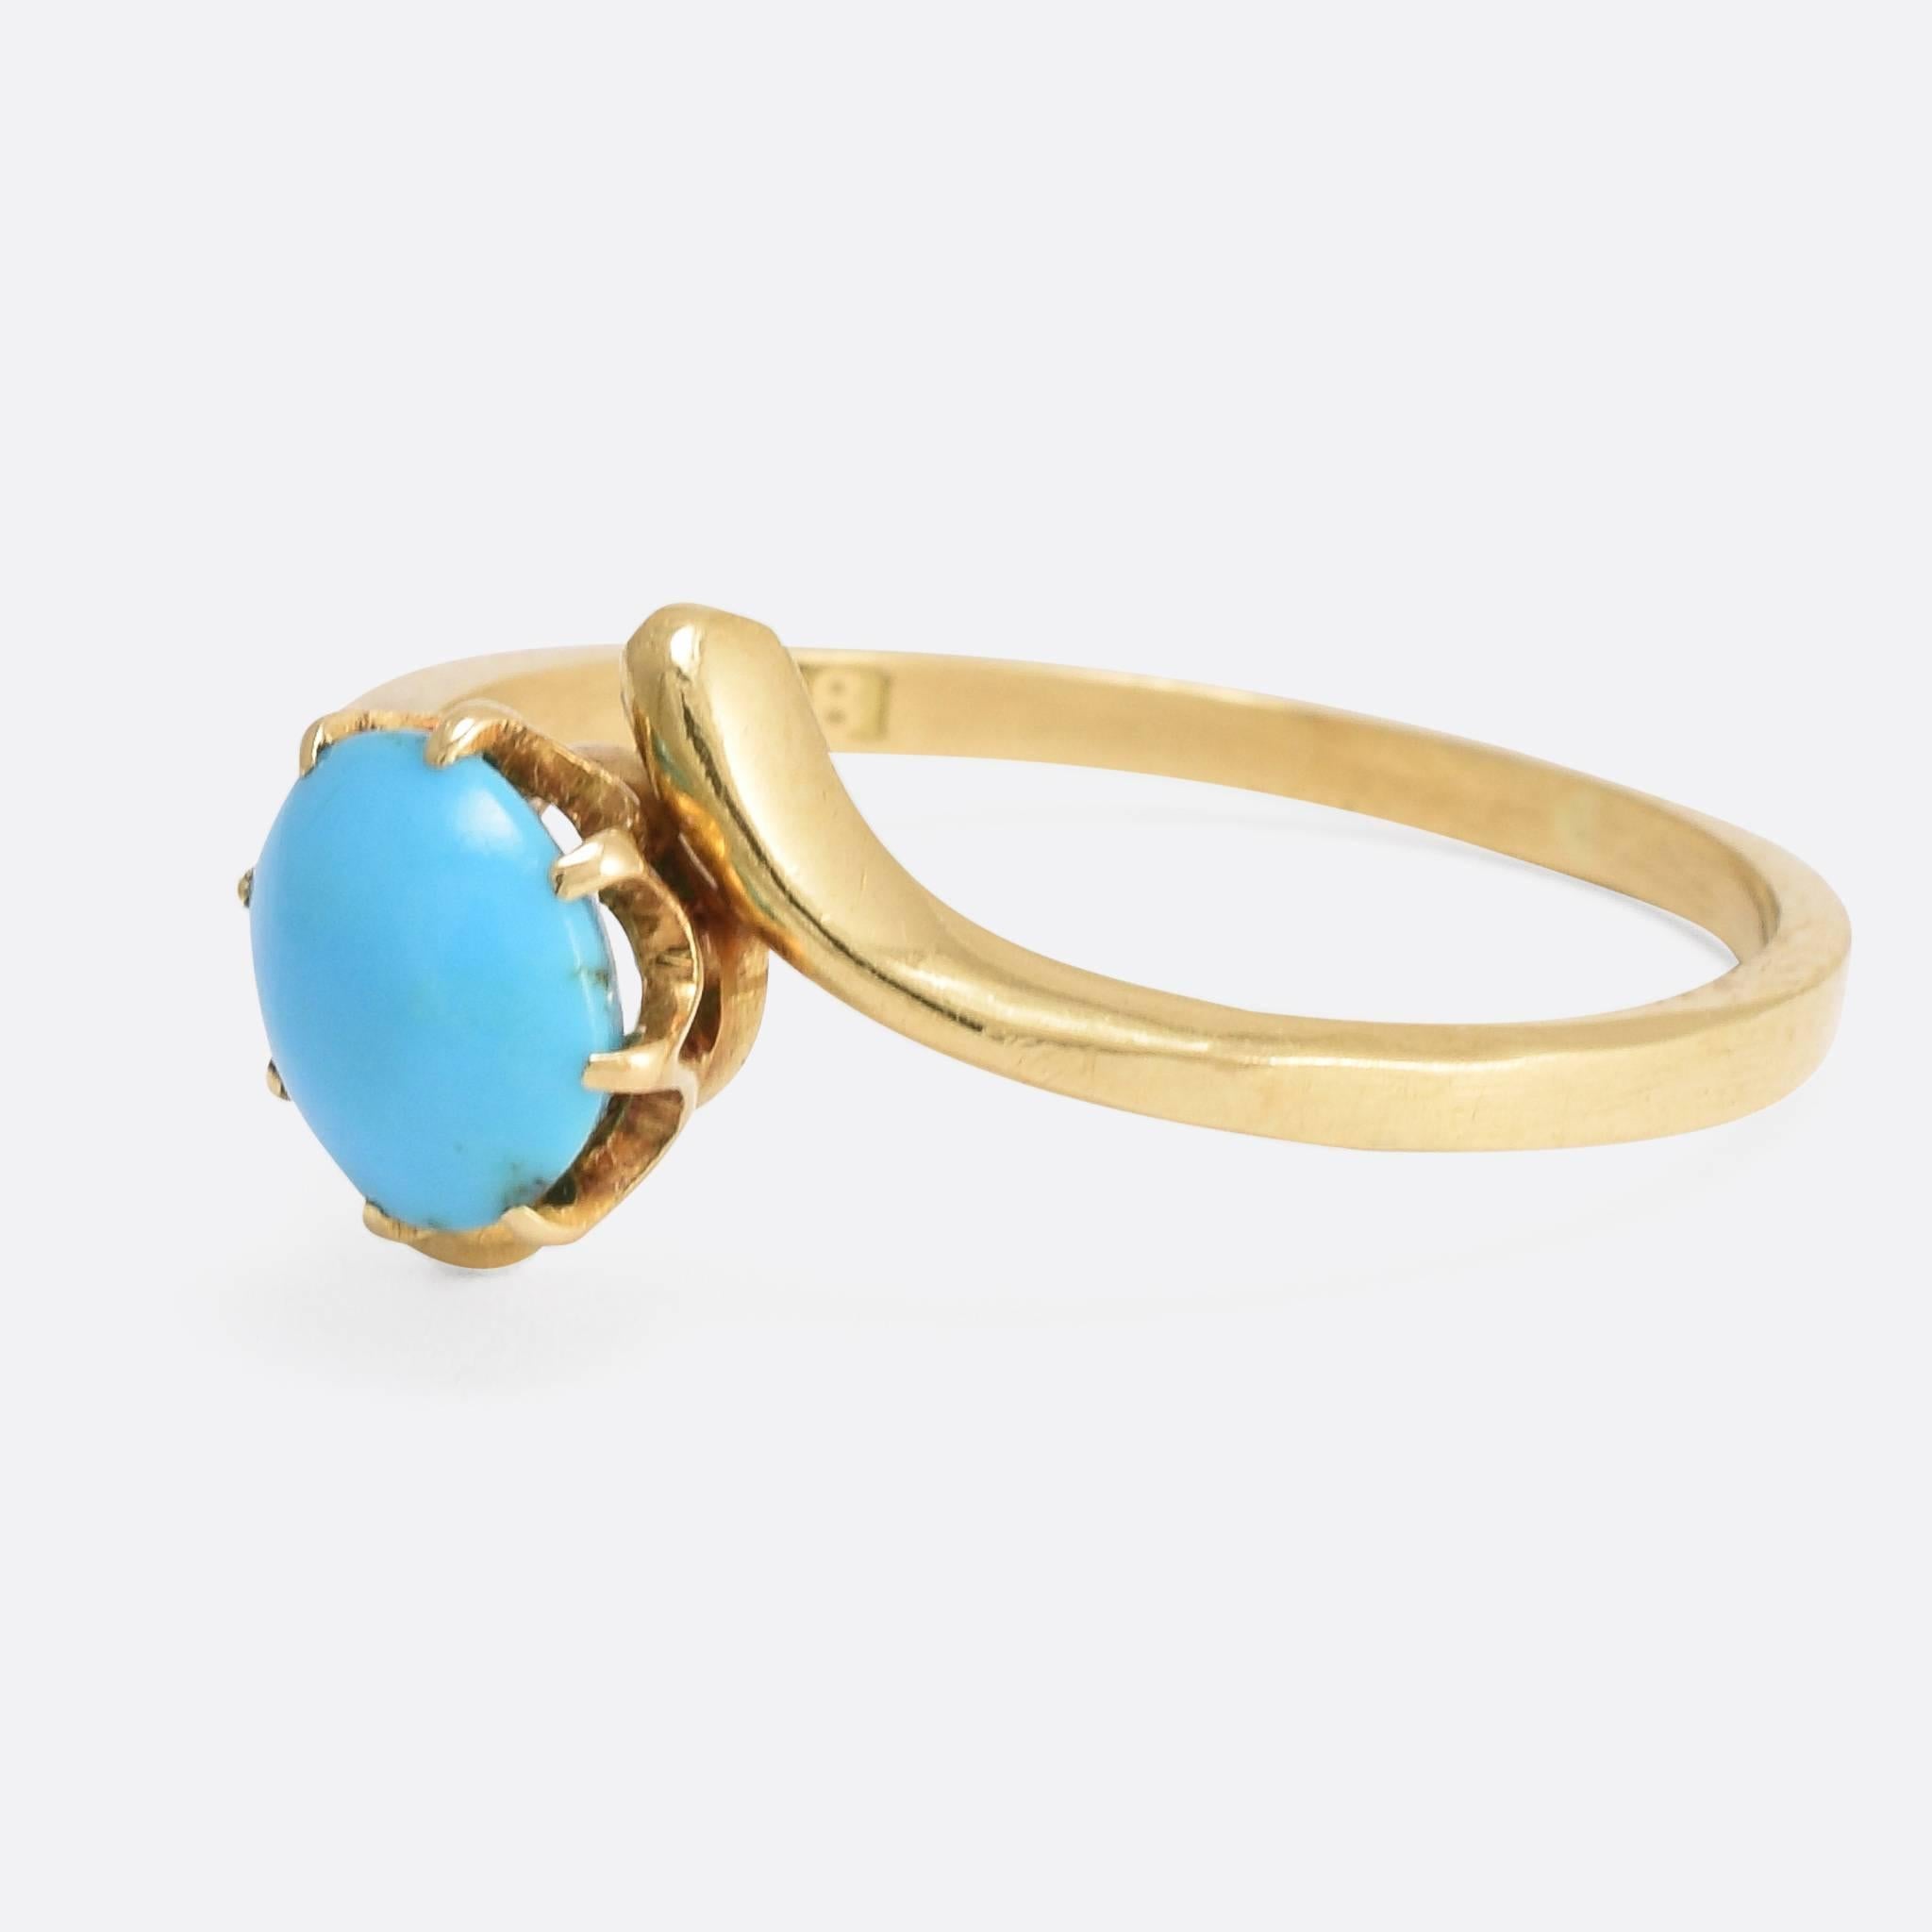 A sweet antique turquoise single-stone ring, with graceful crossover shoulders very much in the Art Nouveau style. It's modelled in 18k yellow gold, and dates to the turn of the century - c.1900. The oval cabochon stone is a great colour, set in a